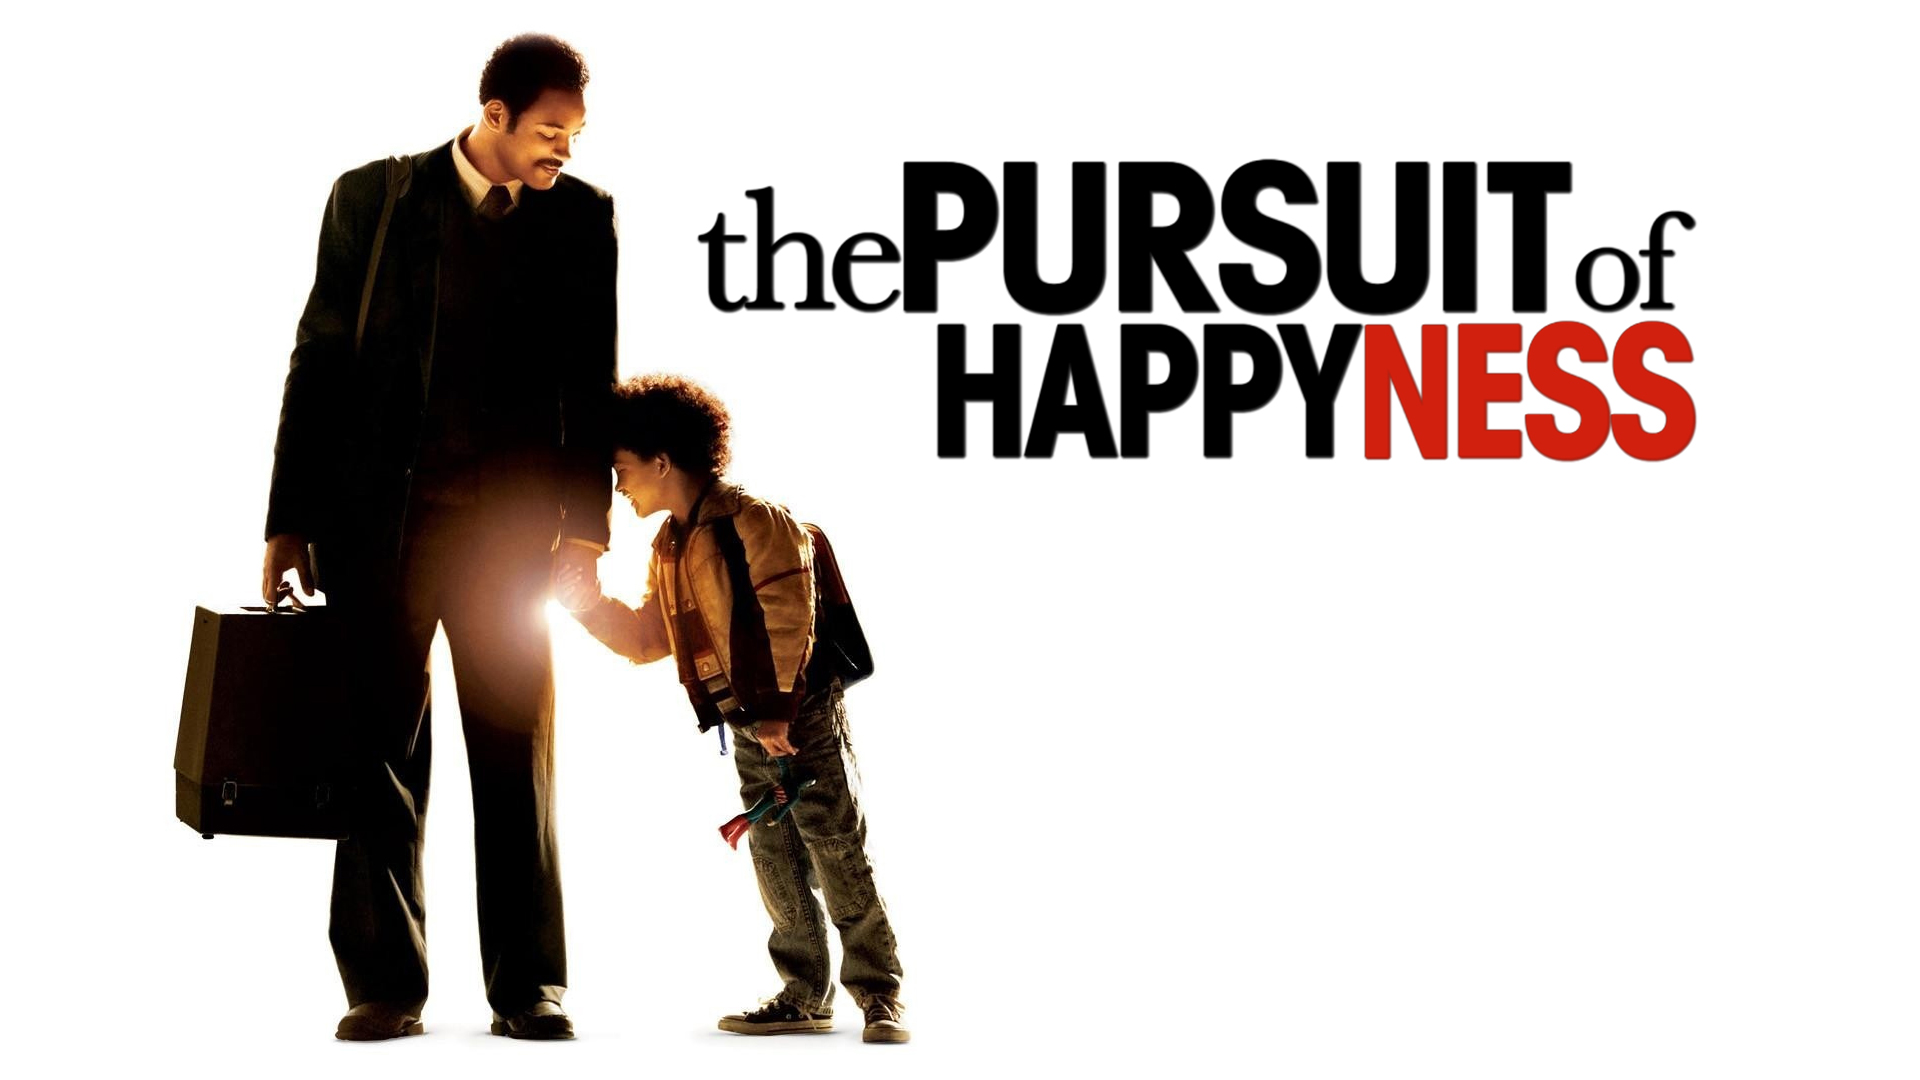 Denis Waitley Quote: “It is not in the pursuit of happiness that we find  fulfillment, it